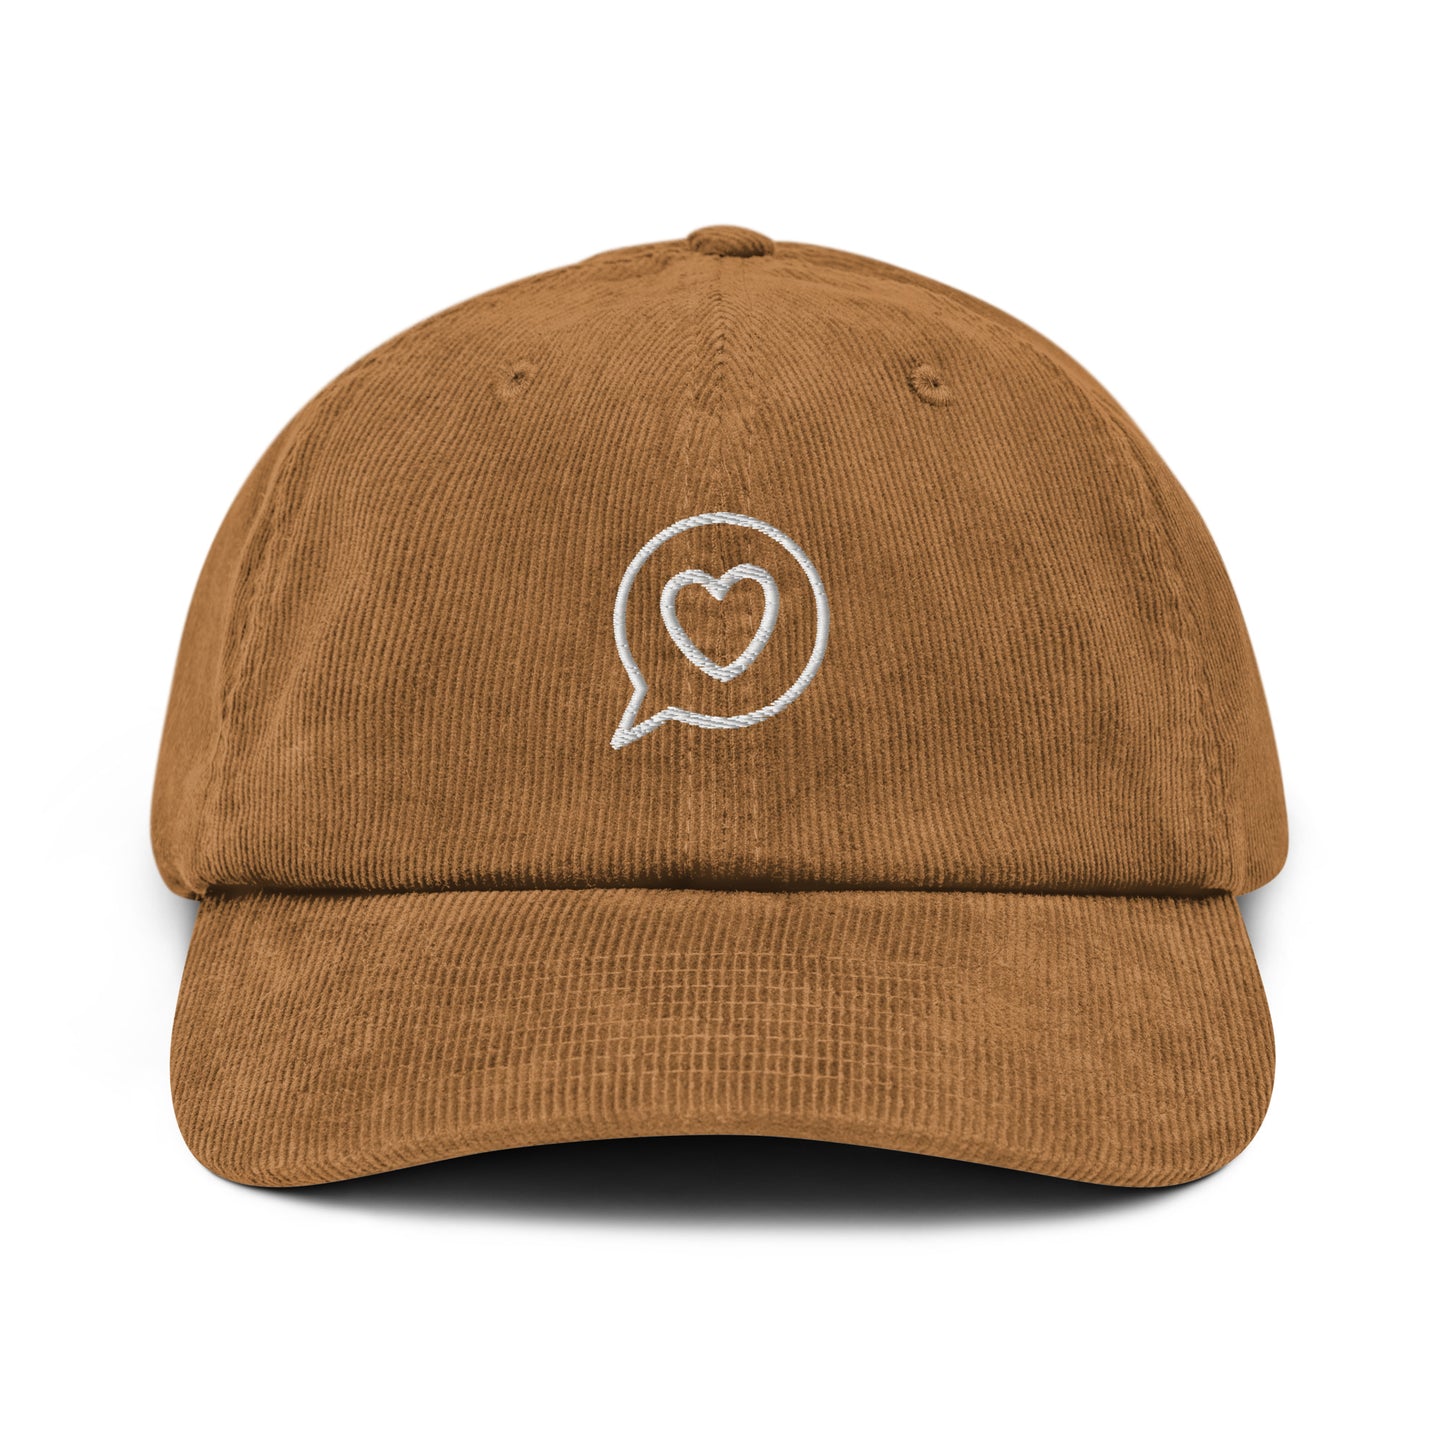 Dad Hat with side Floral Design - You choose hat color! Corduroy hat. Cute Gift. Gifts for her